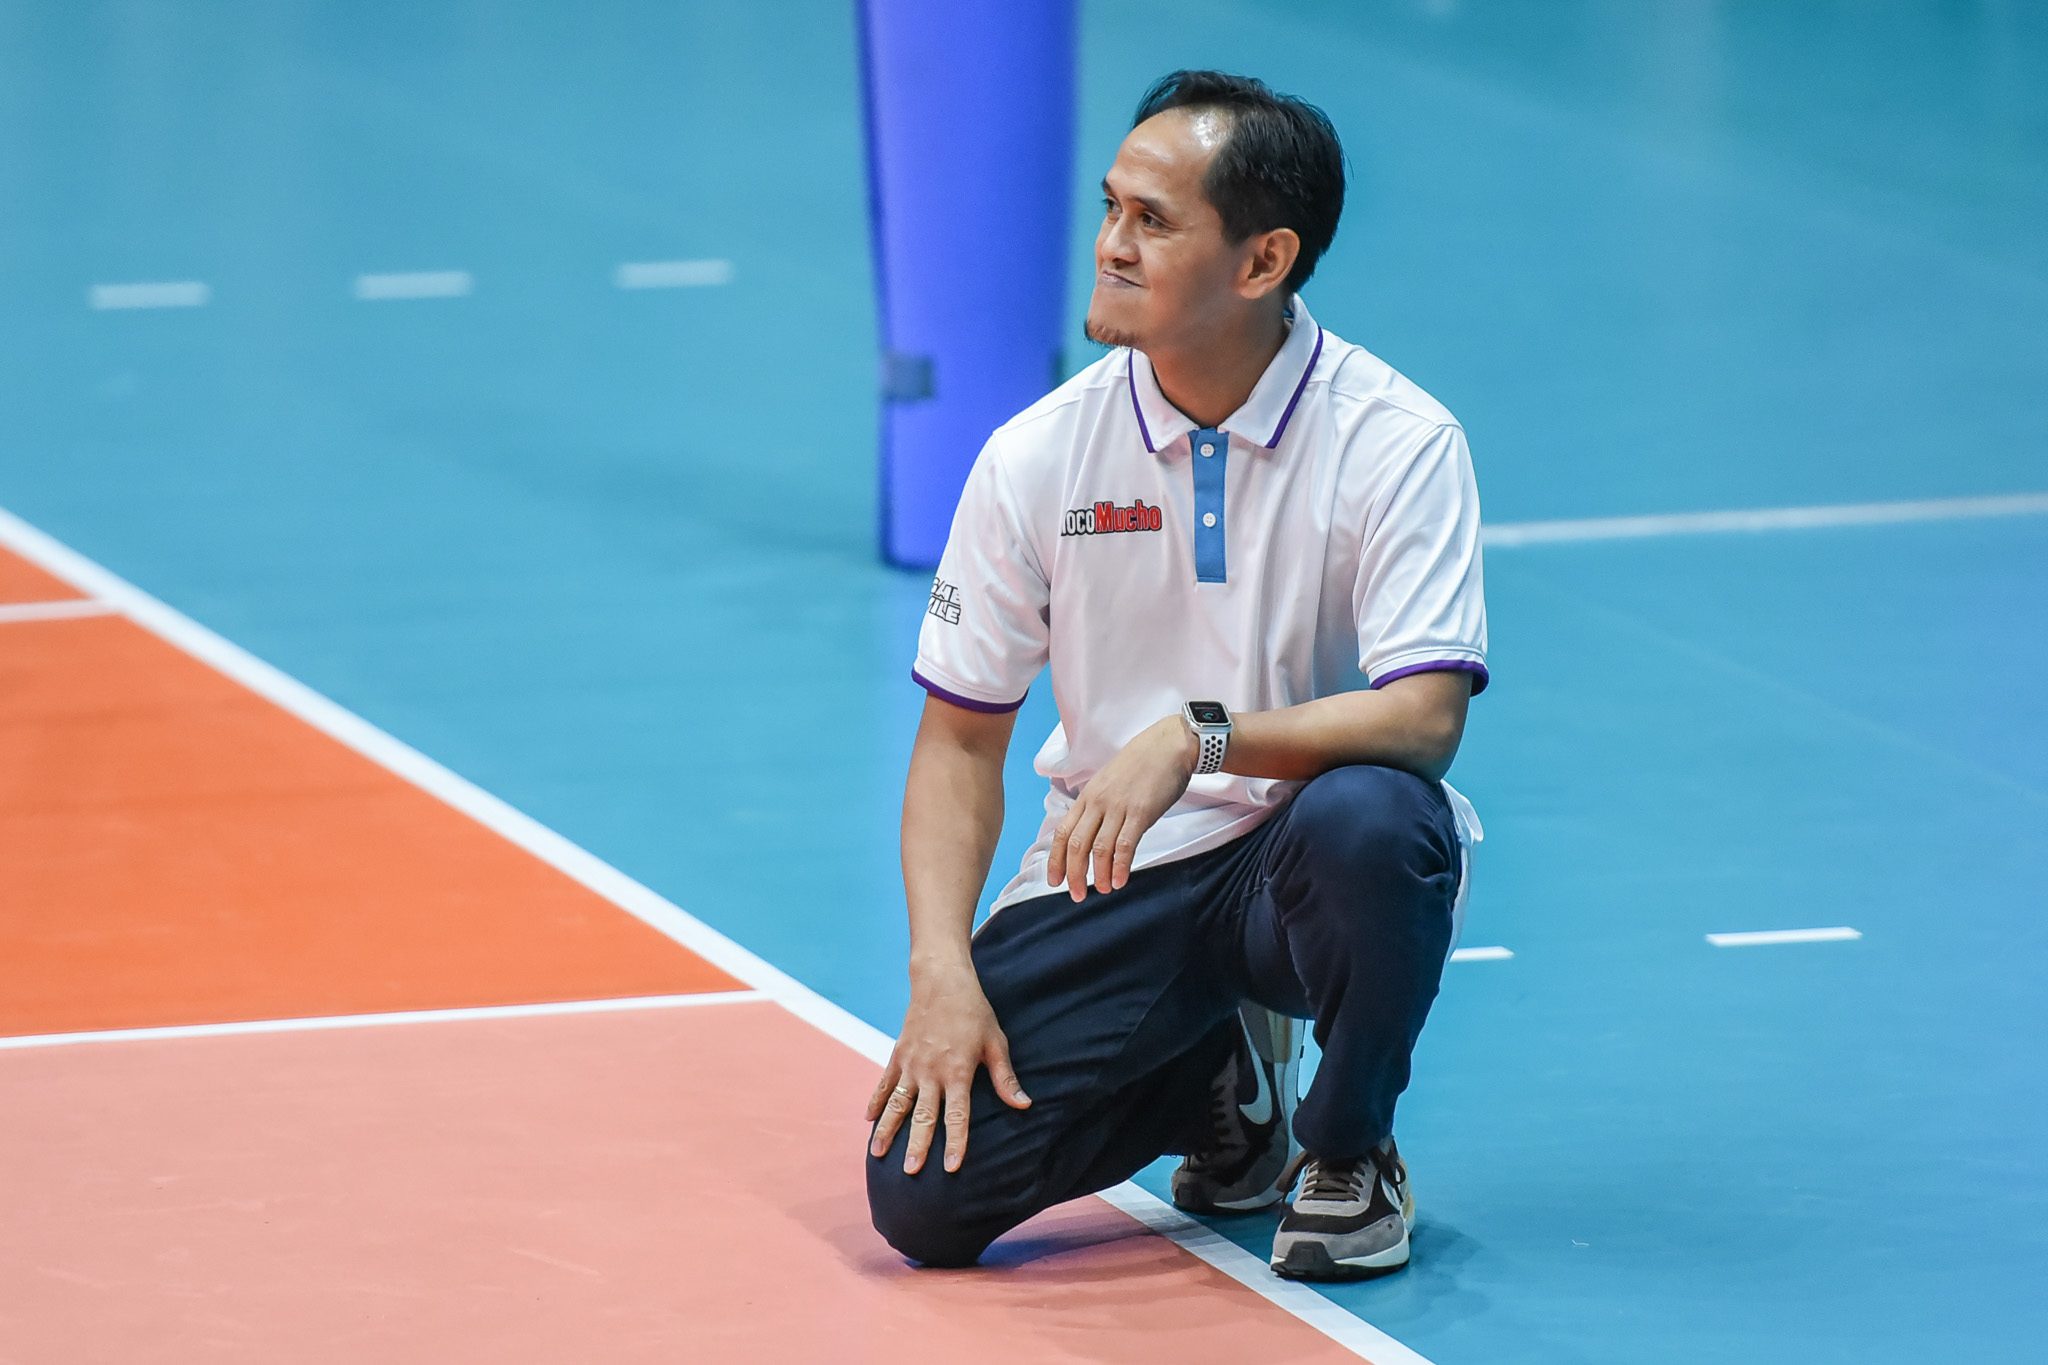 Oliver Almadro resigns from Choco Mucho, focuses on Ateneo women’s volleyball